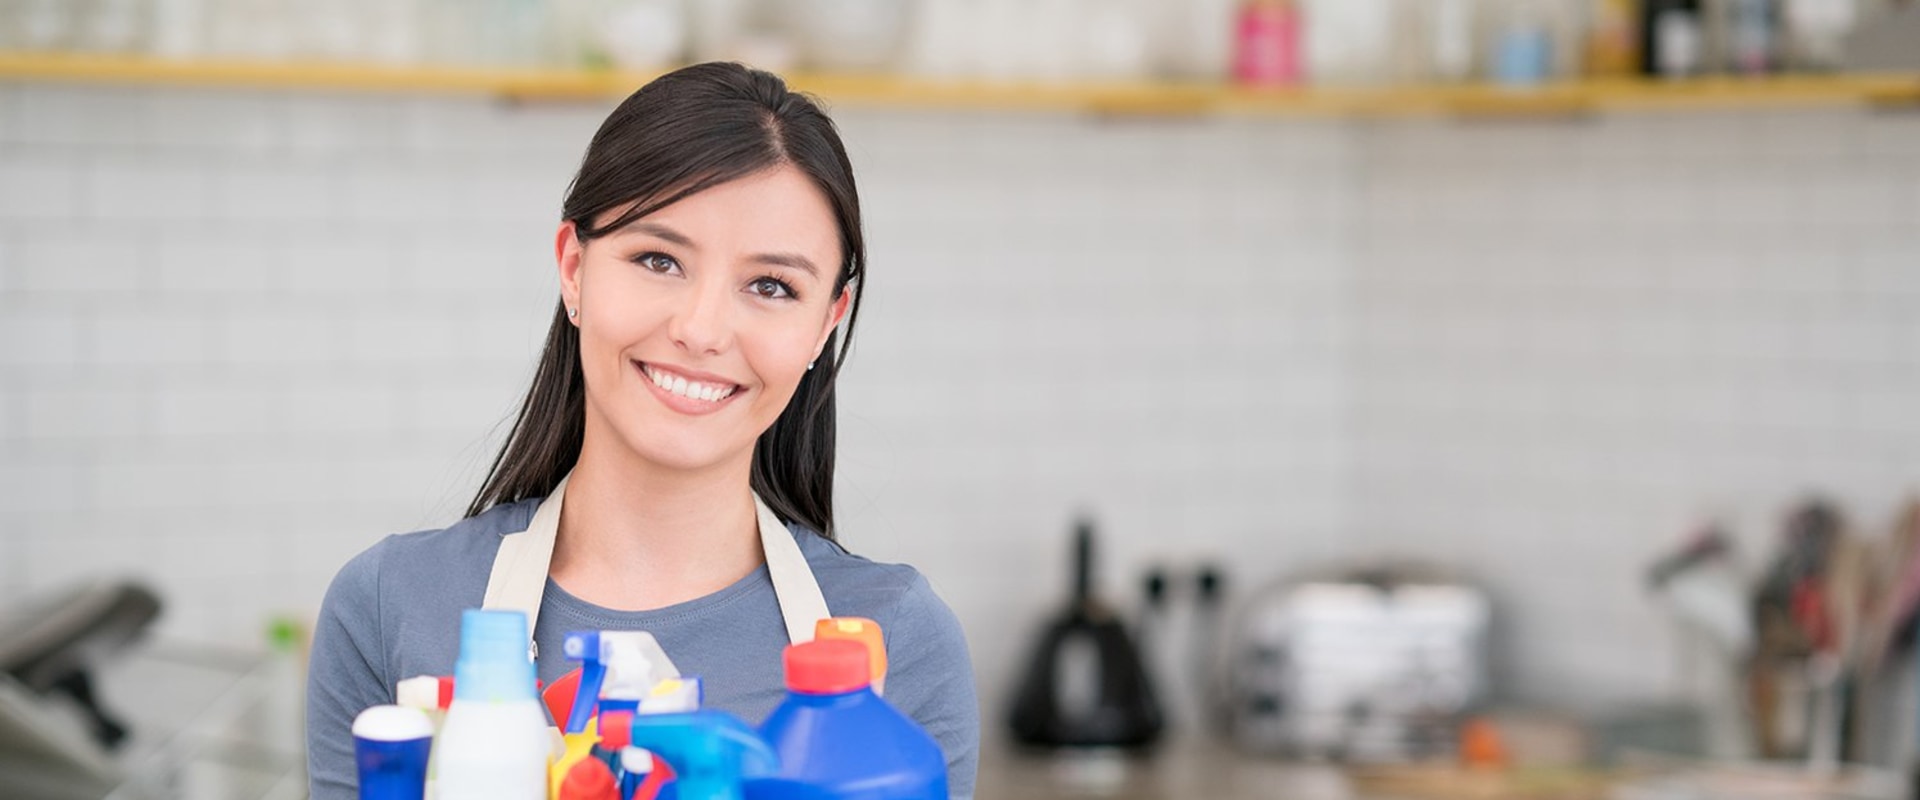 What makes a cleaning business successful?